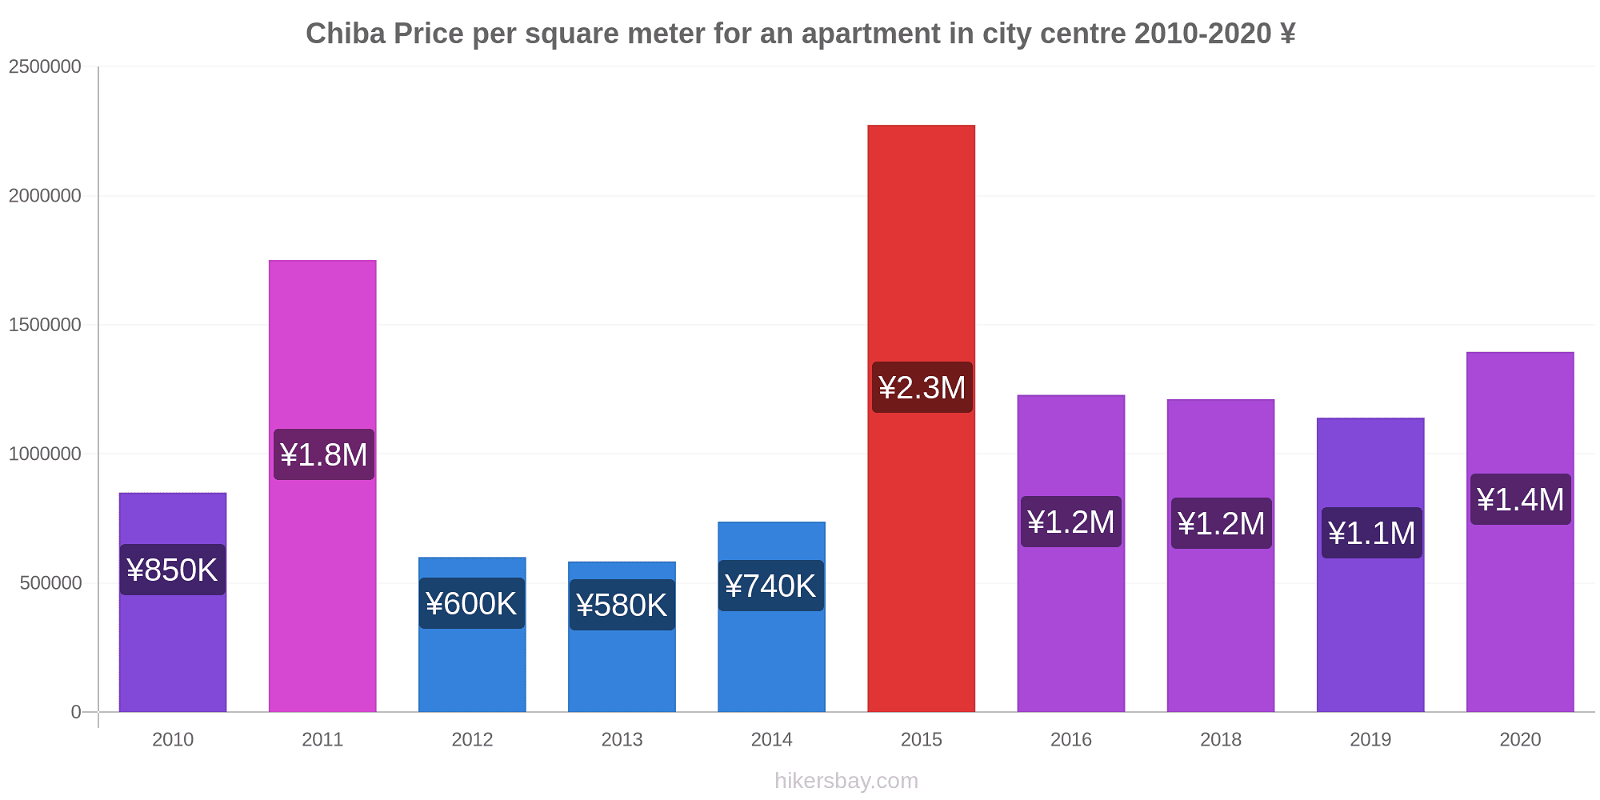 Chiba price changes Price per square meter for an apartment in city centre hikersbay.com